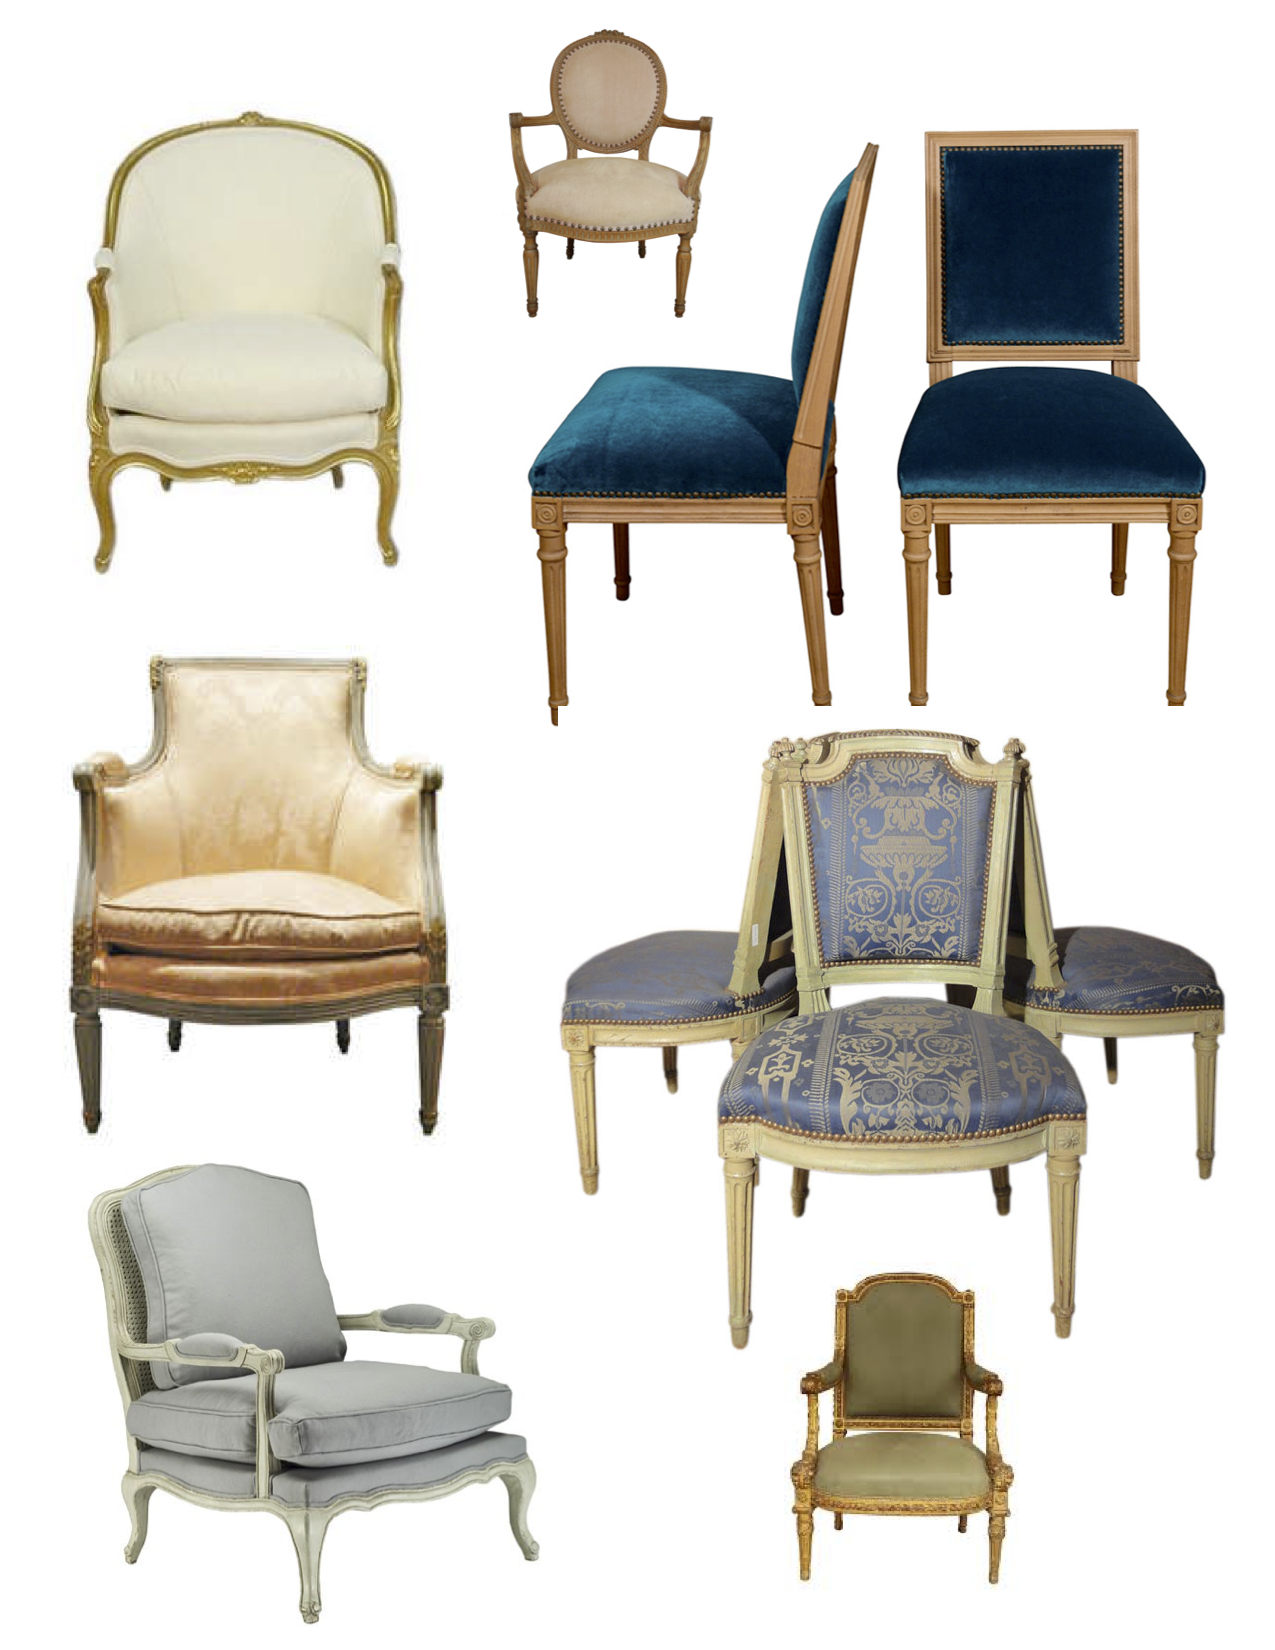 Installeren Krijger Monumentaal French By Royal Design: The “Louis”, “Fauteuil” & “Bergere” Chair | House  Appeal